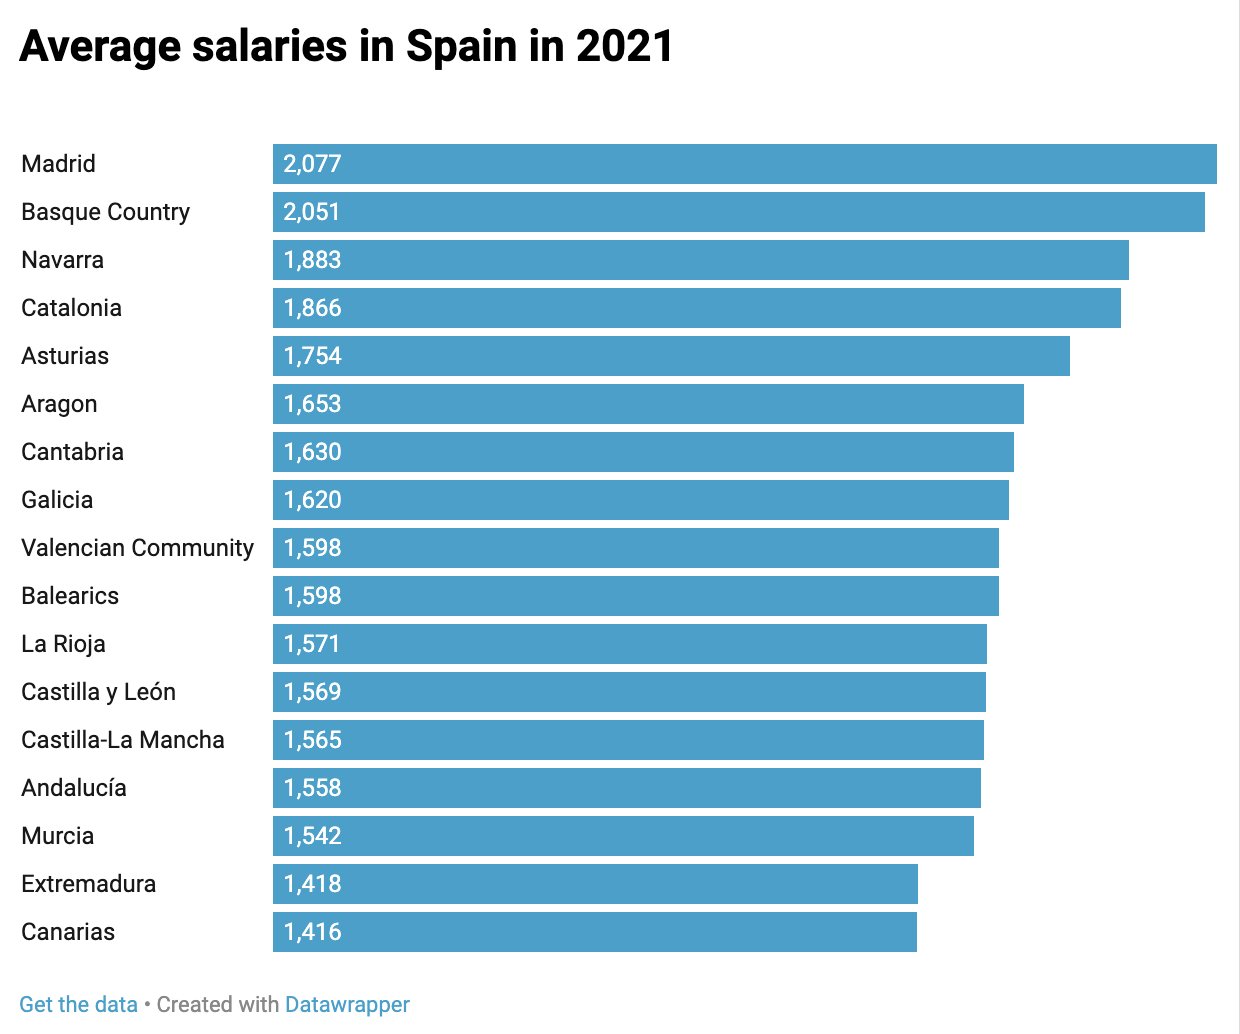 What are the average salaries in each region of Spain?